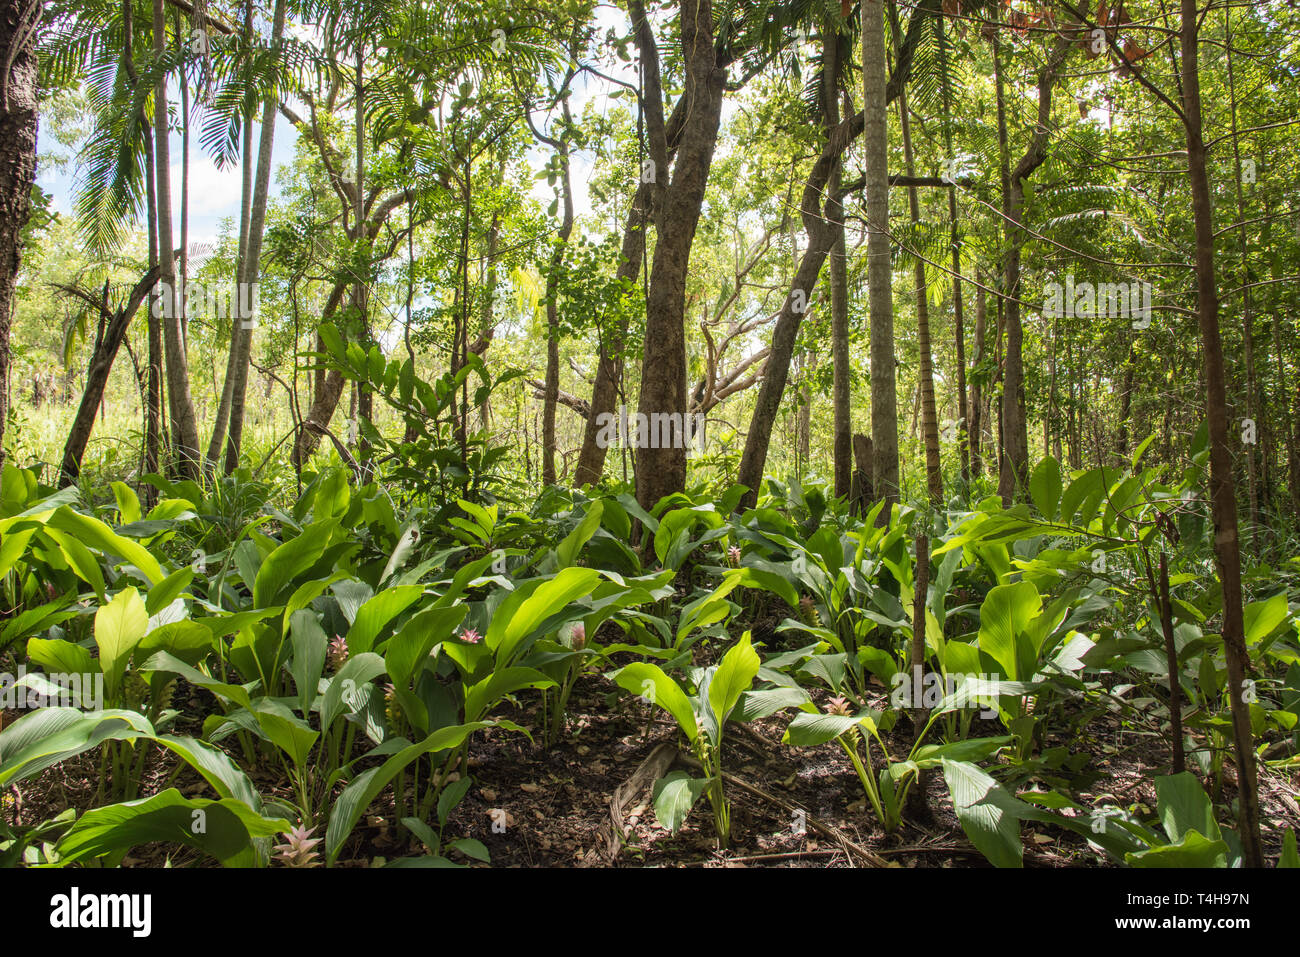 Wild ginger flowering plants with lush greenery in the Monsoon Forest at Litchfield National Park in the Northern Territory of Australia Stock Photo